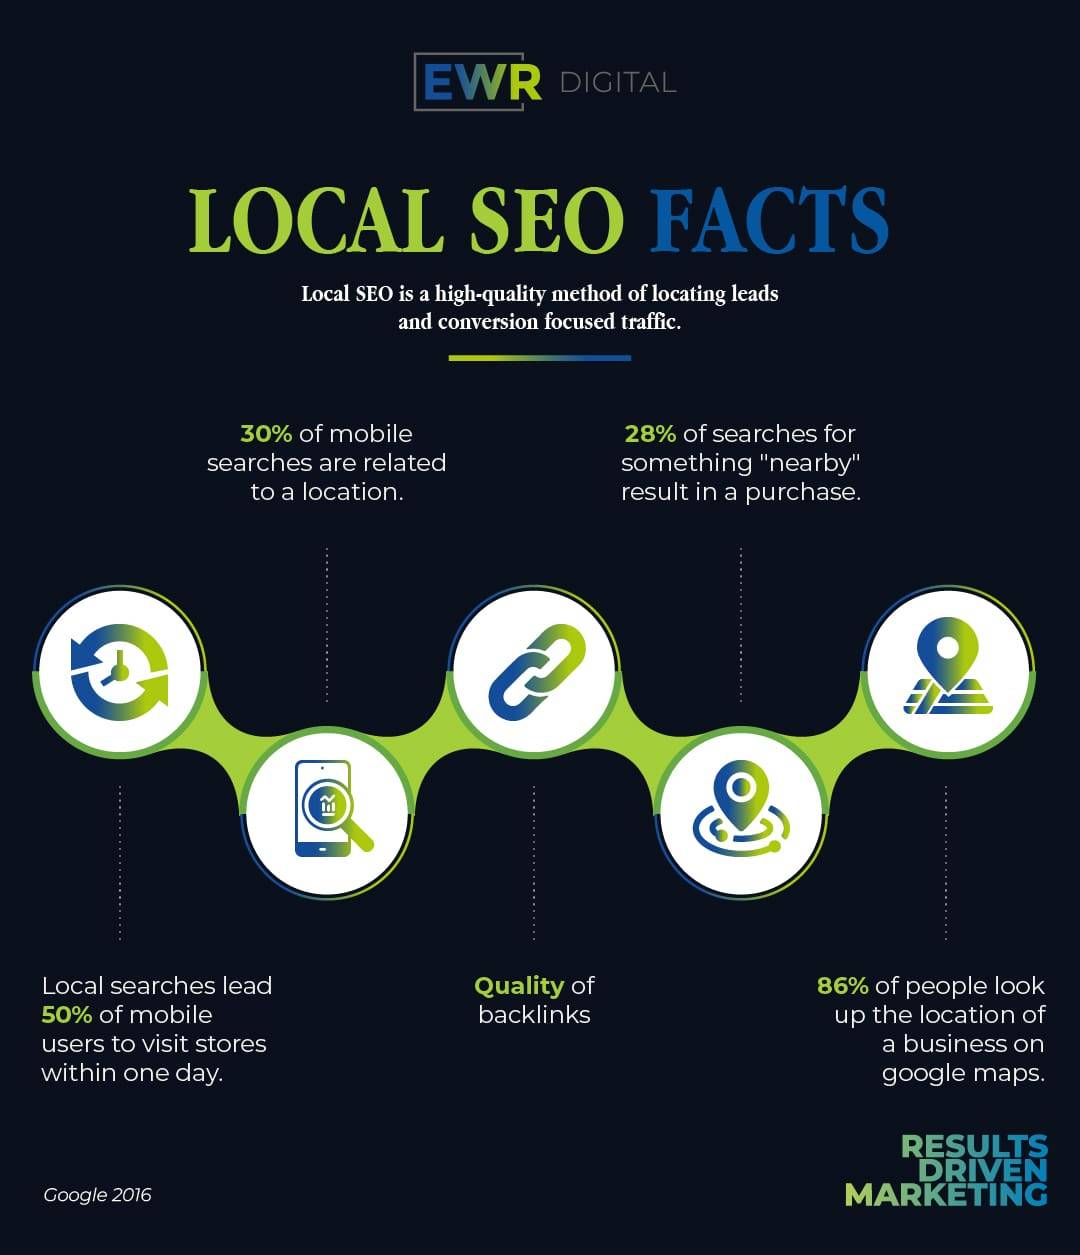 Local SEO Facts, Searches, mobile, location, local searches, quality backlinks, location, google maps, people searching